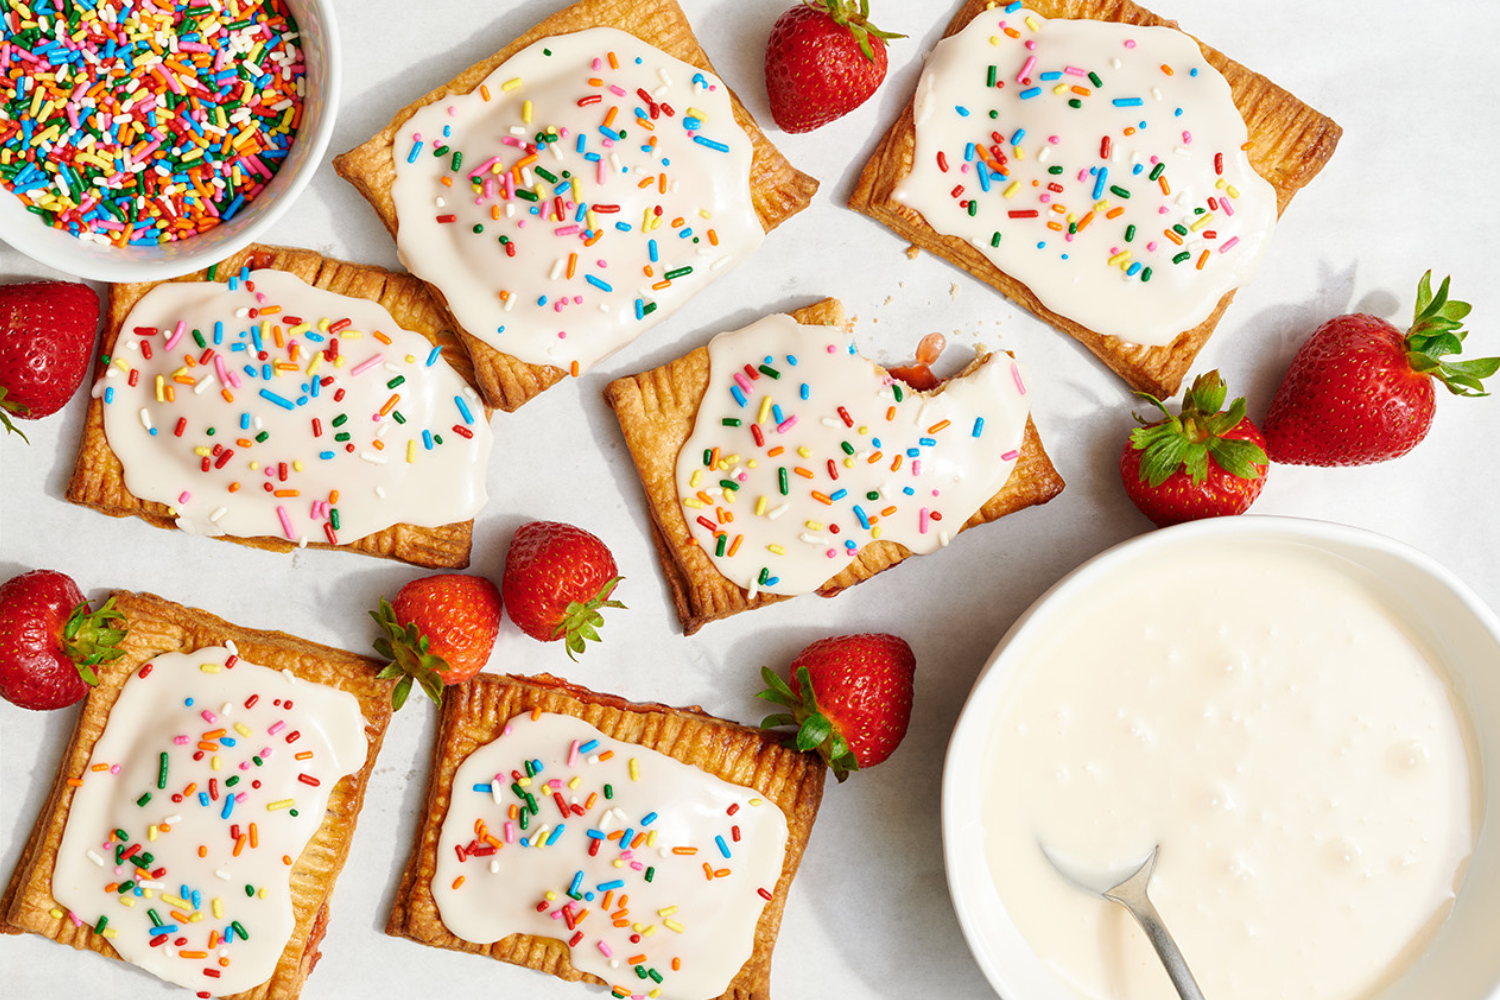 several poptarts on a white background with some fresh strawberries in between.